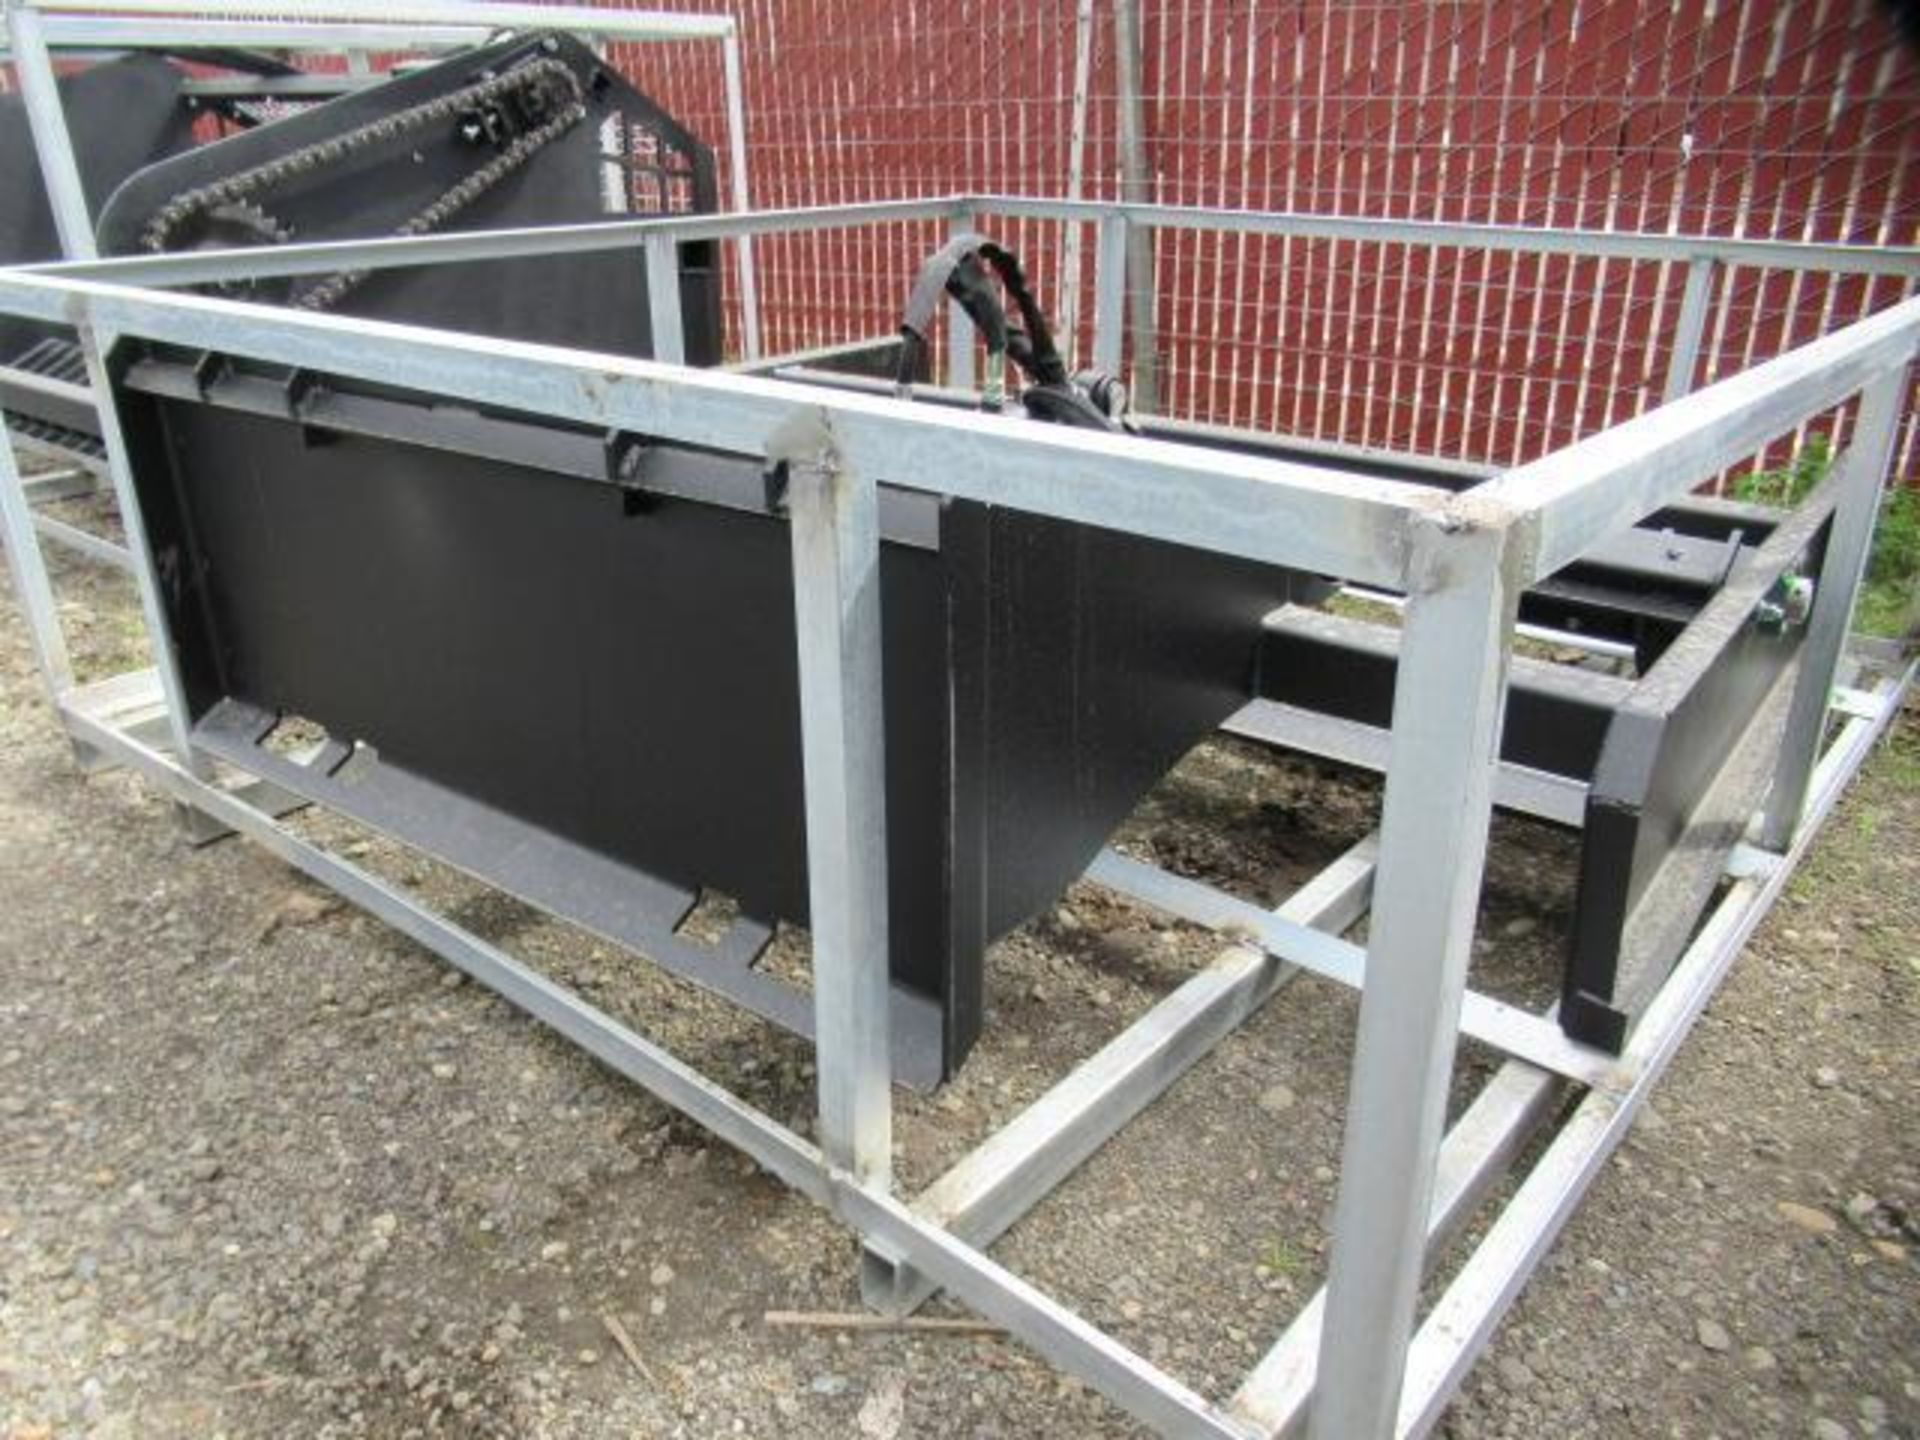 GREATBEAR 003-044-71-002A 70'' SKID STEER BOX GRADER ATTACHMENT W/ HYDRAULIC FITTINGS (UNUSED) - Image 2 of 5